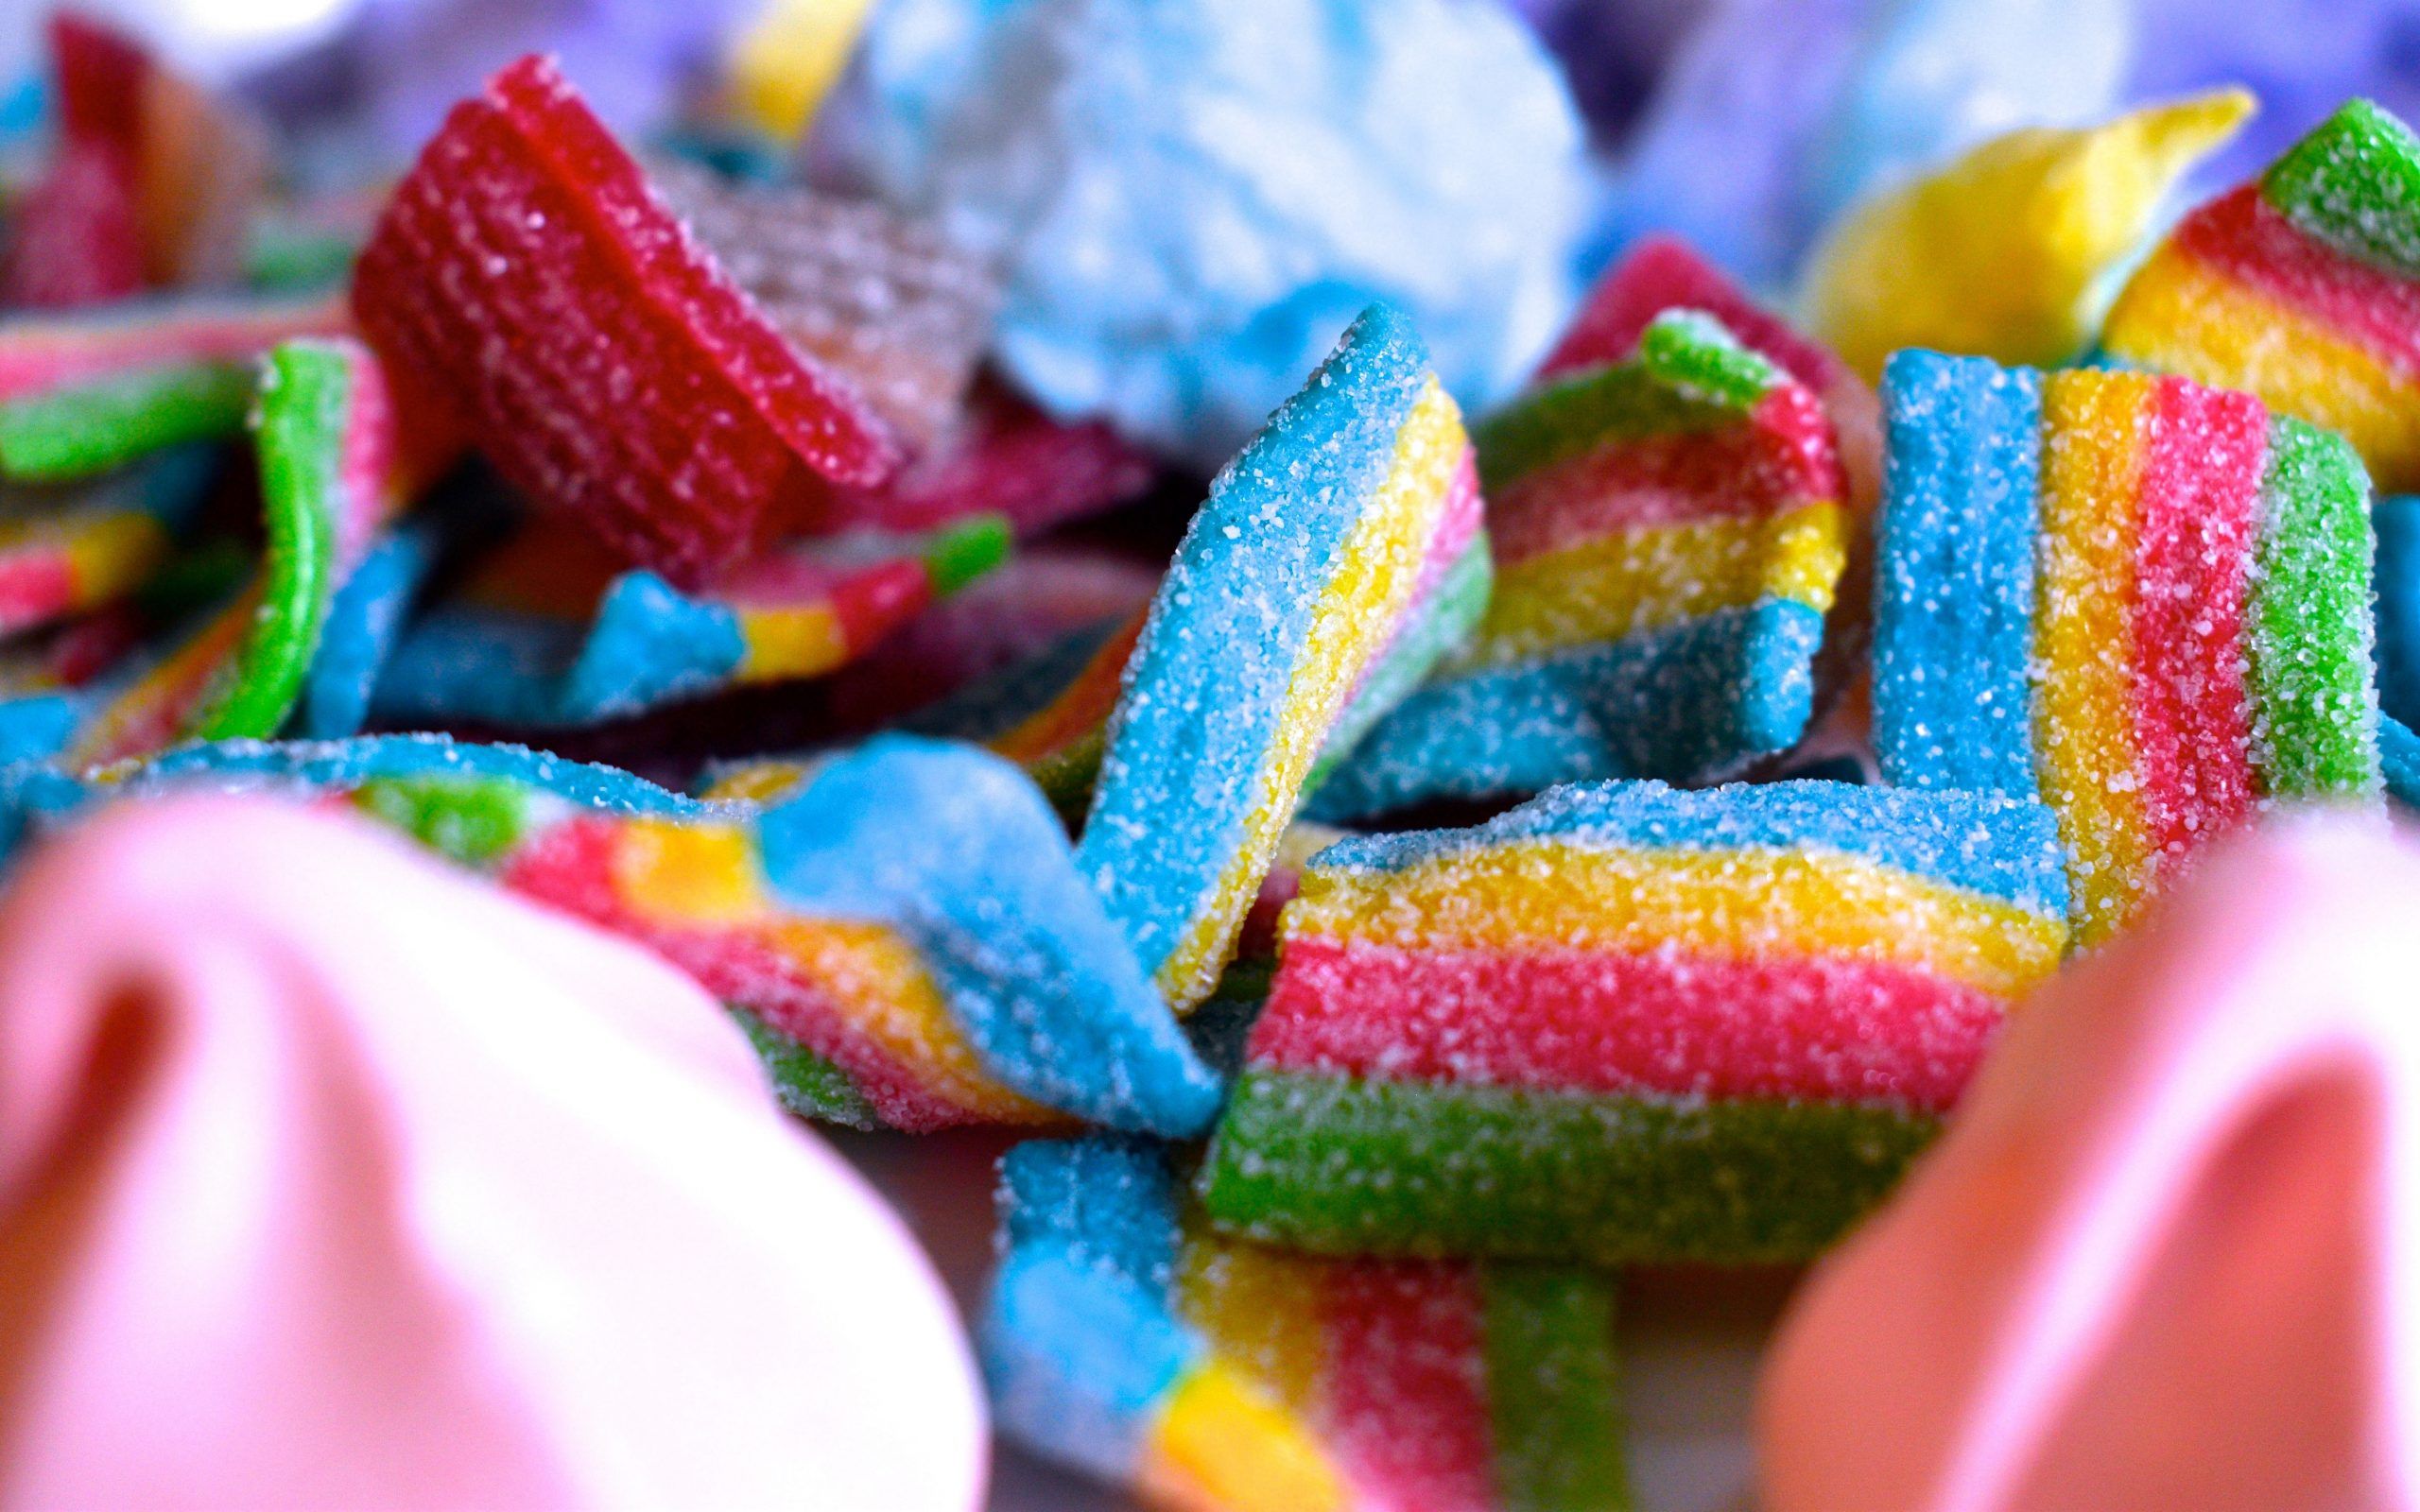 A pile of colorful gummy worms. - Candy